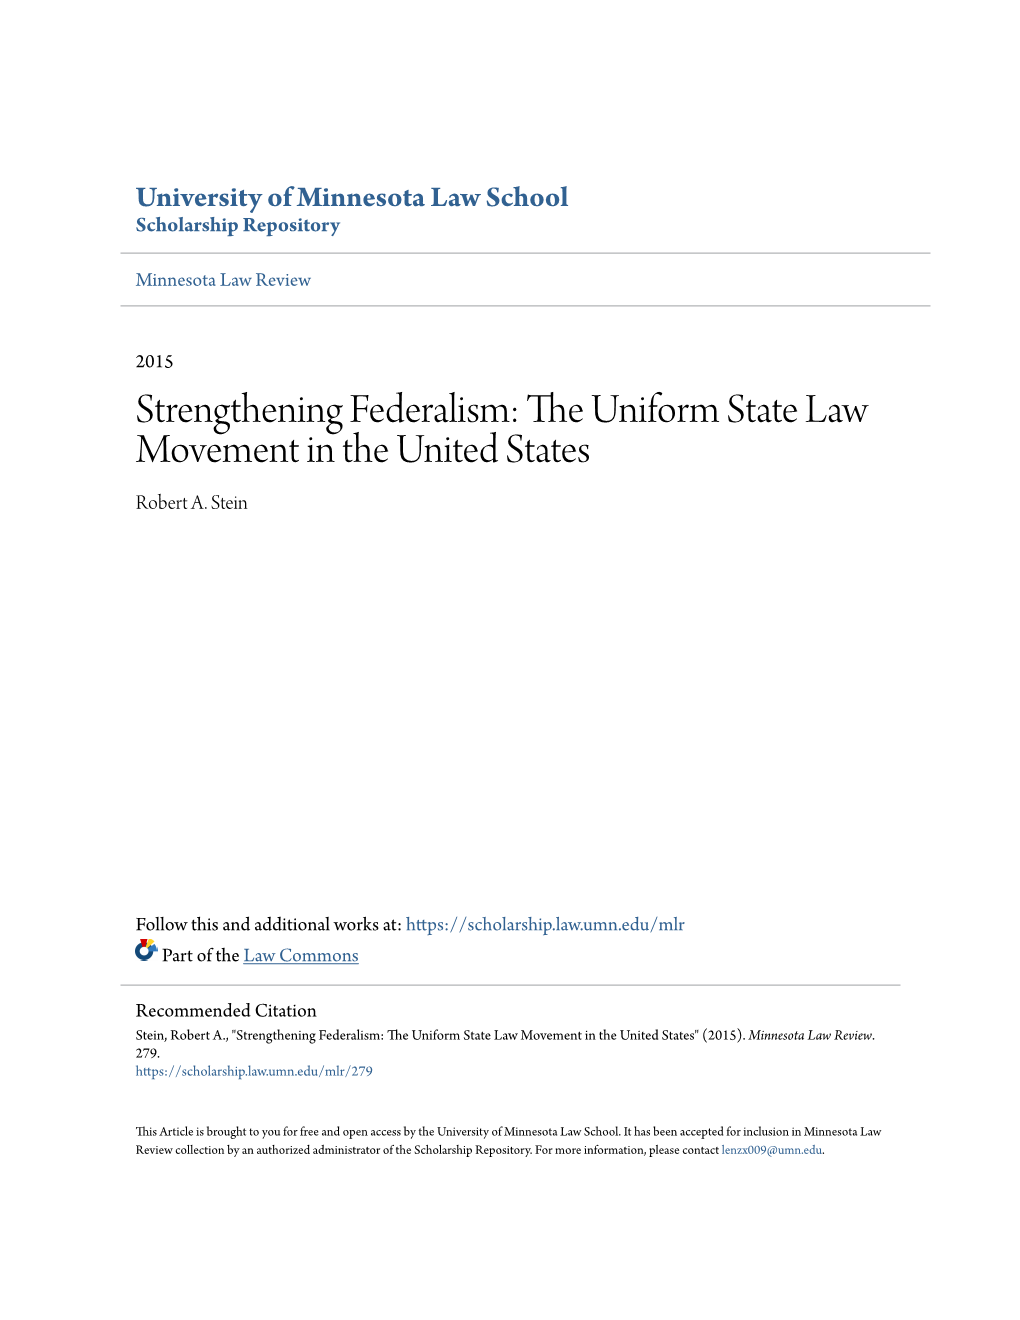 Strengthening Federalism: the Uniform State Law Movement in the United States